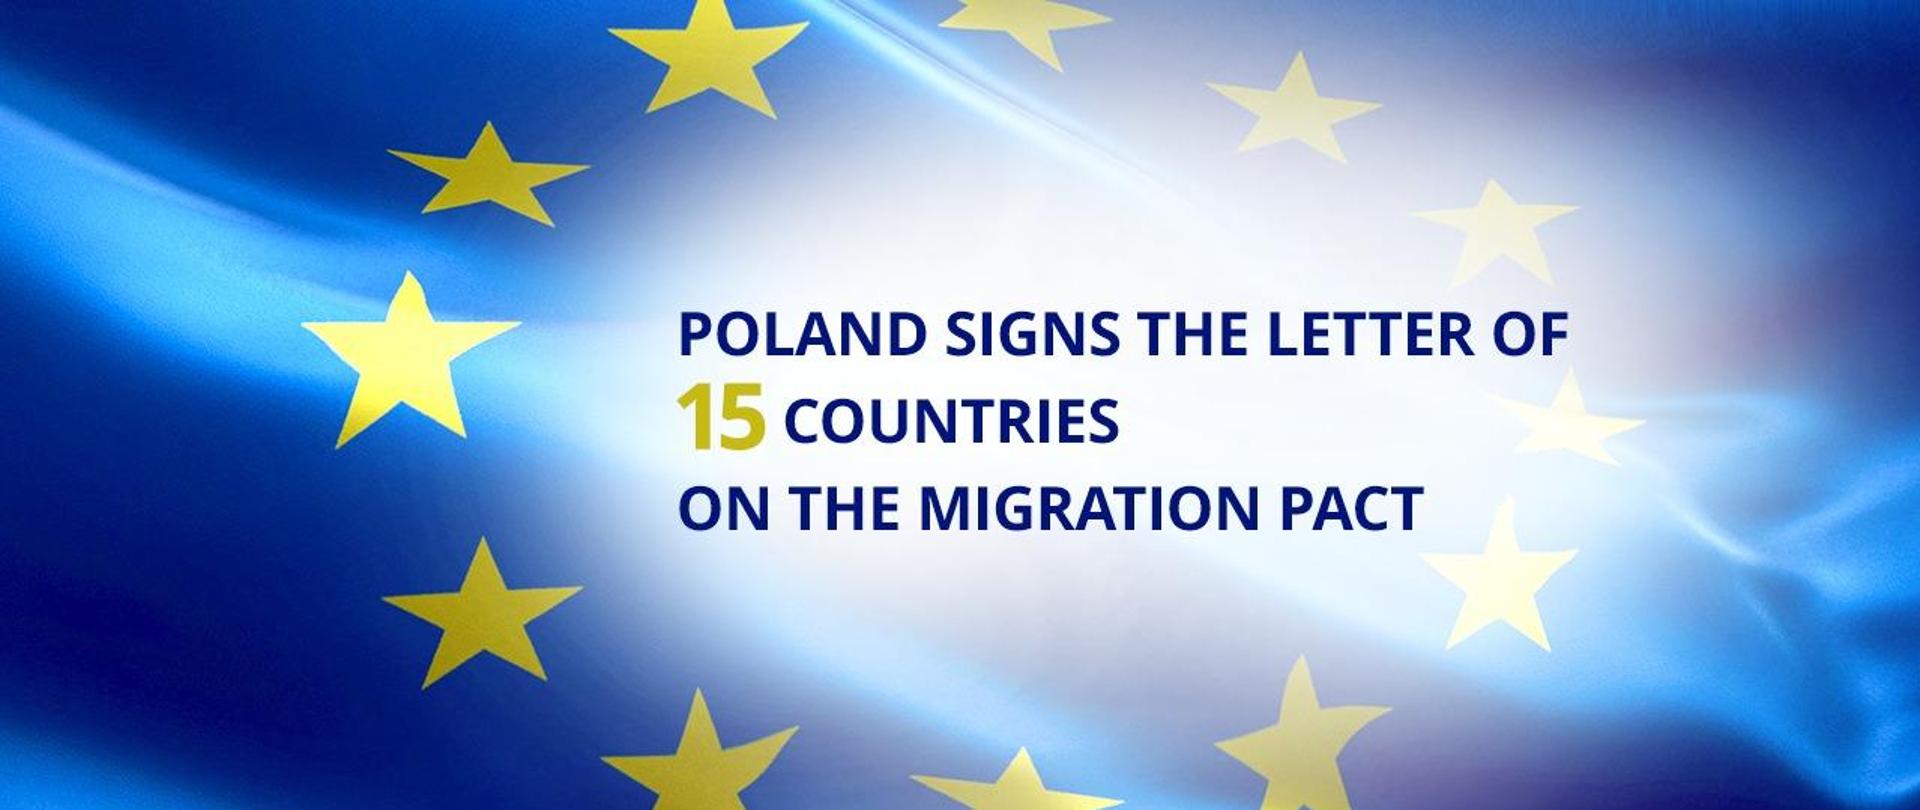 European Union flag with the inscription Poland signs the letter of 15 countries on the migration pact